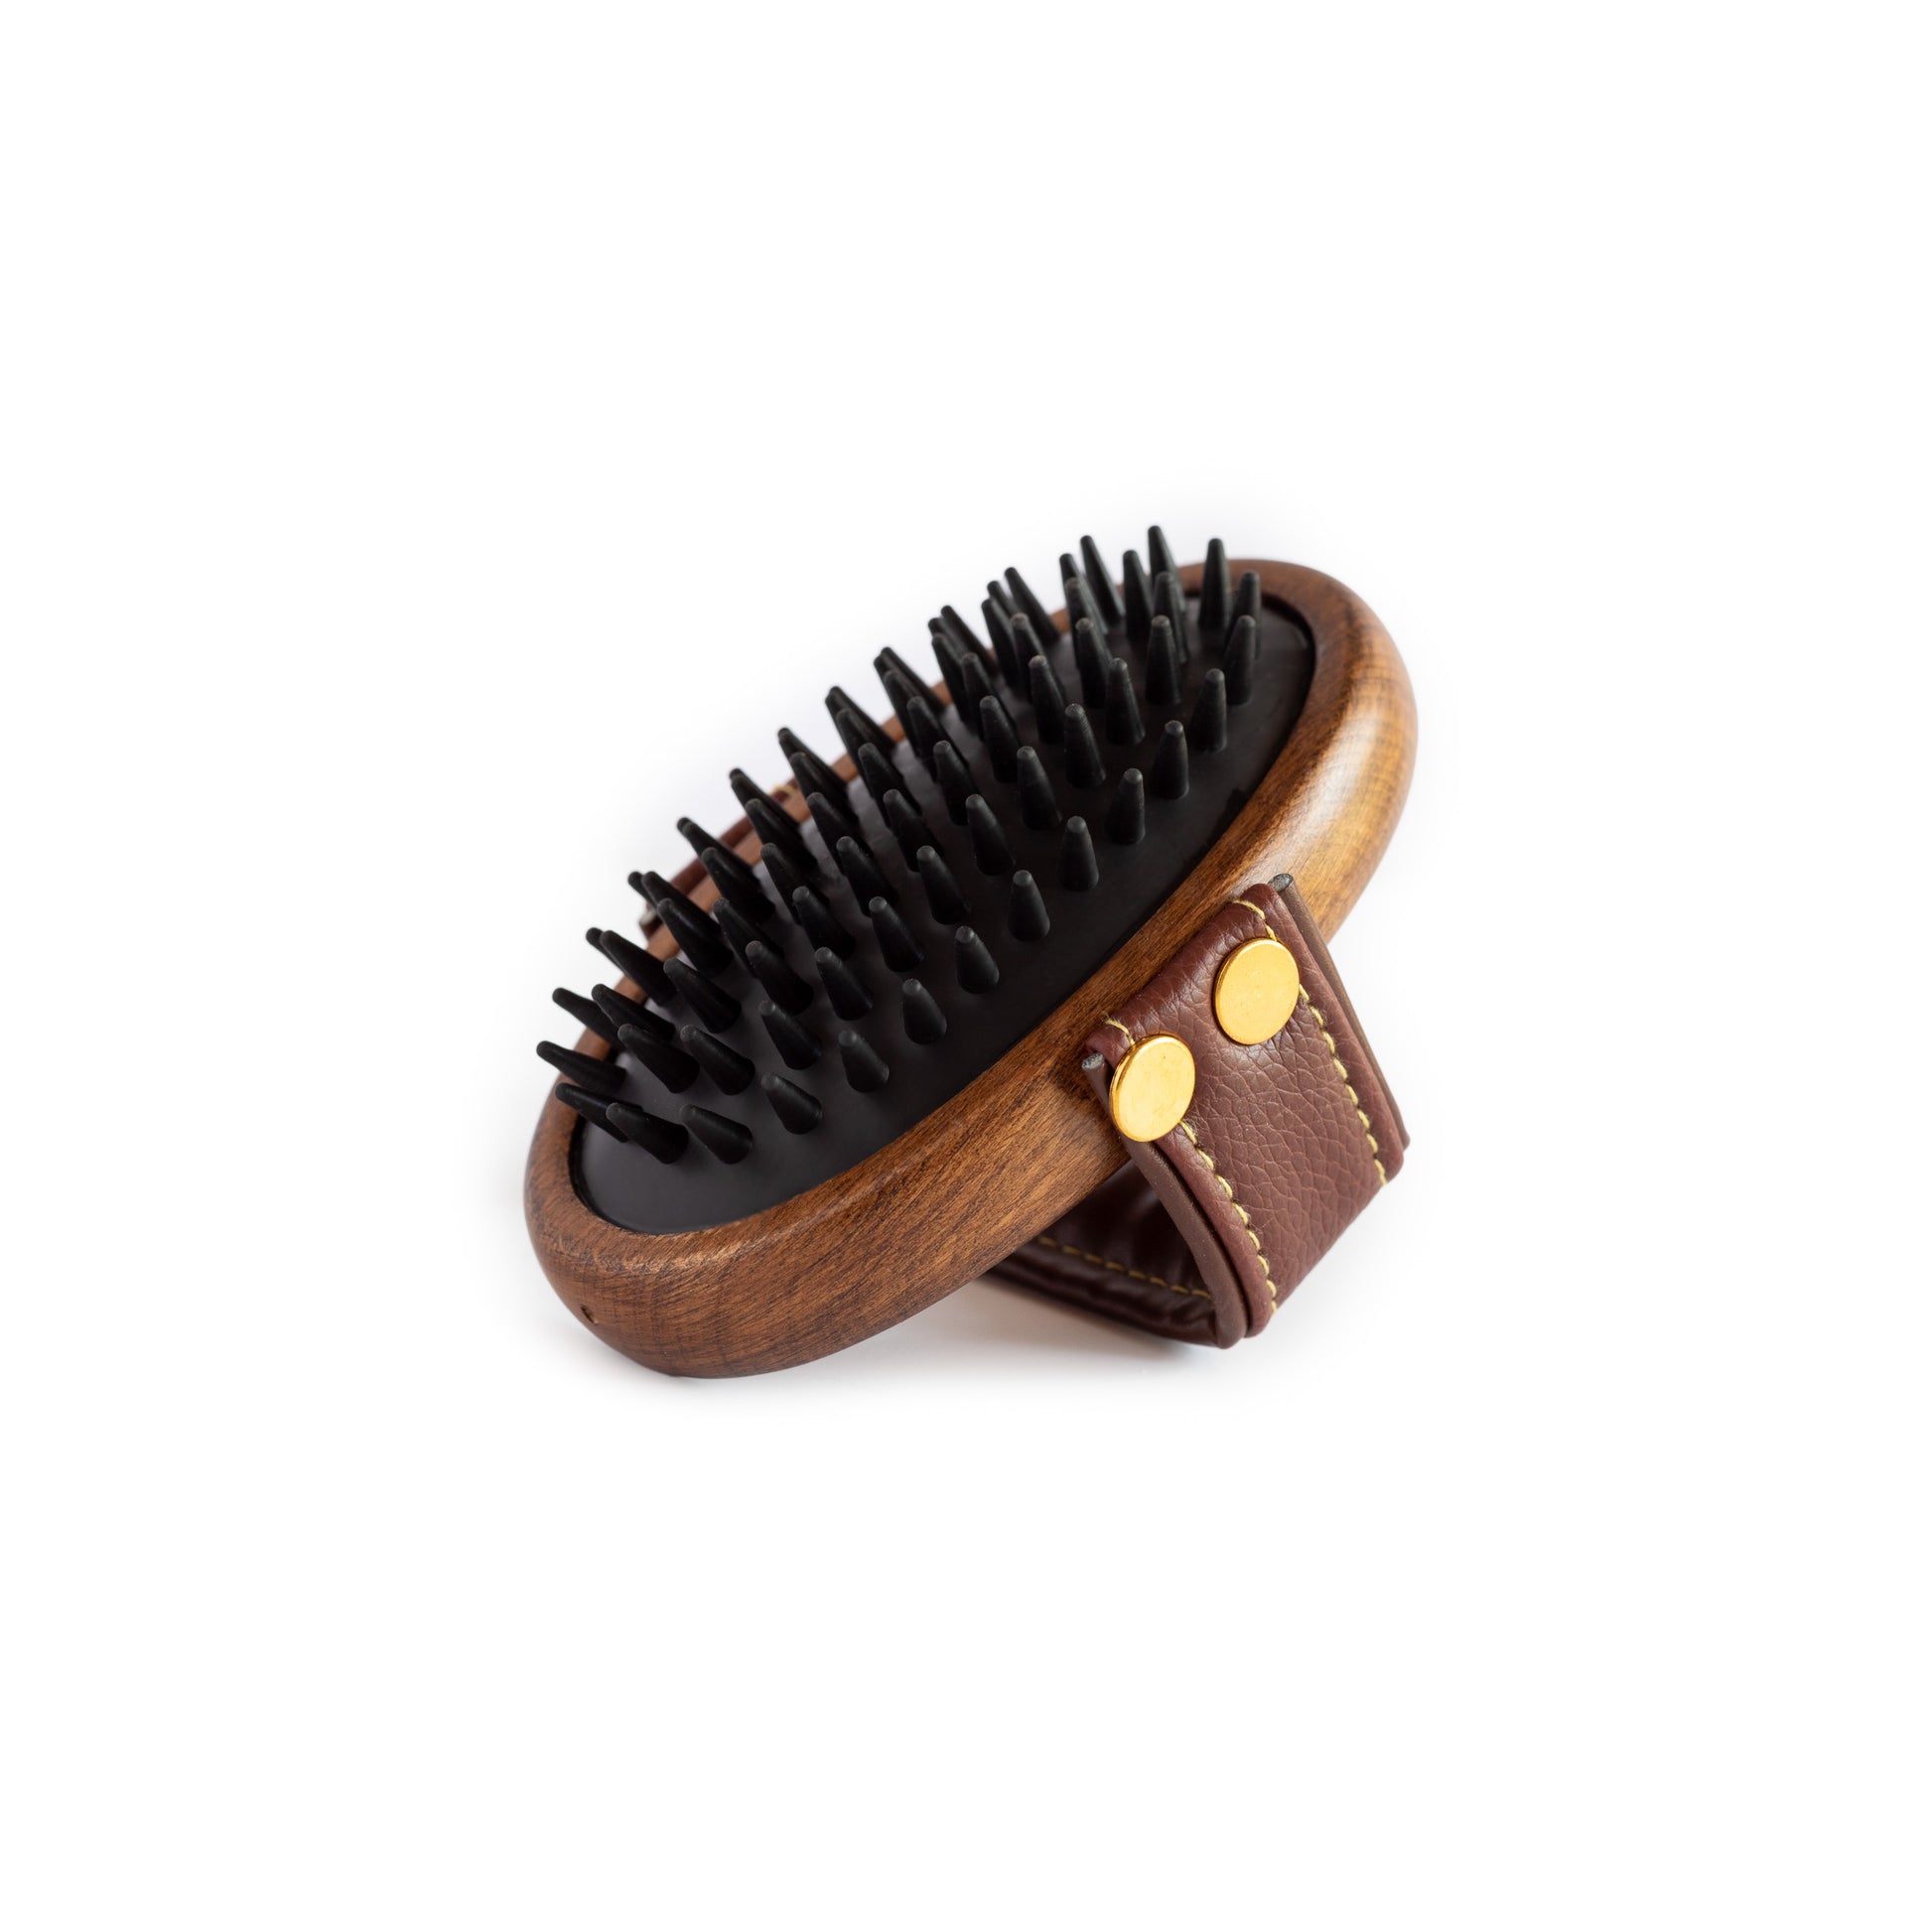 A Hairy Pony Rubber Brush.